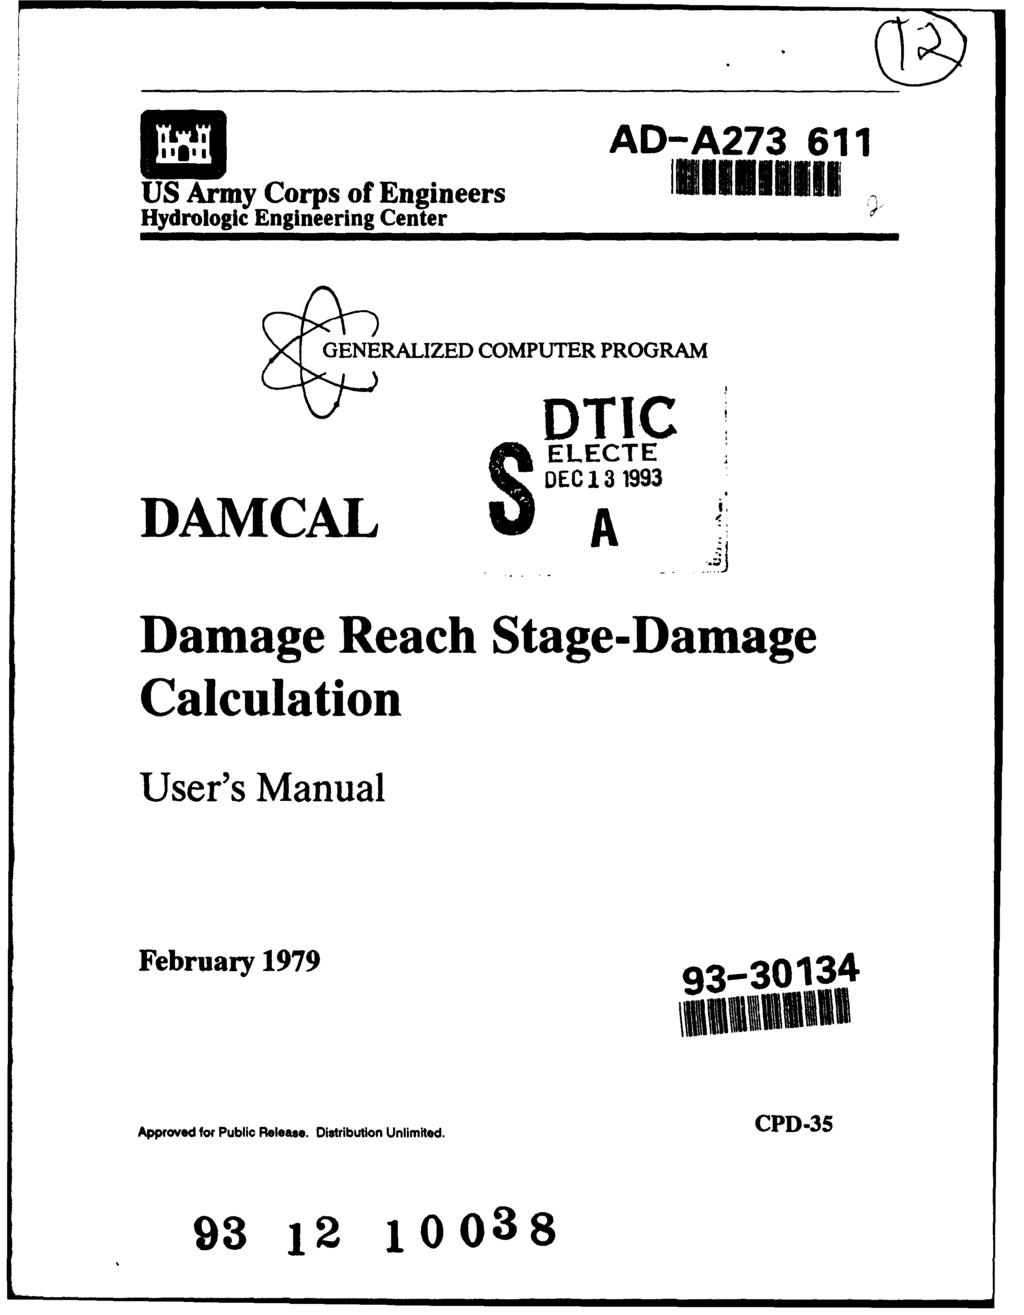 M AD-A273 611 US Army Corps of Engineers Hydrologic Engineering Center GENERALIZED COMPUTER PROGRAM DAMCAL DTIC "k ELECTE DEC 13 1993 A